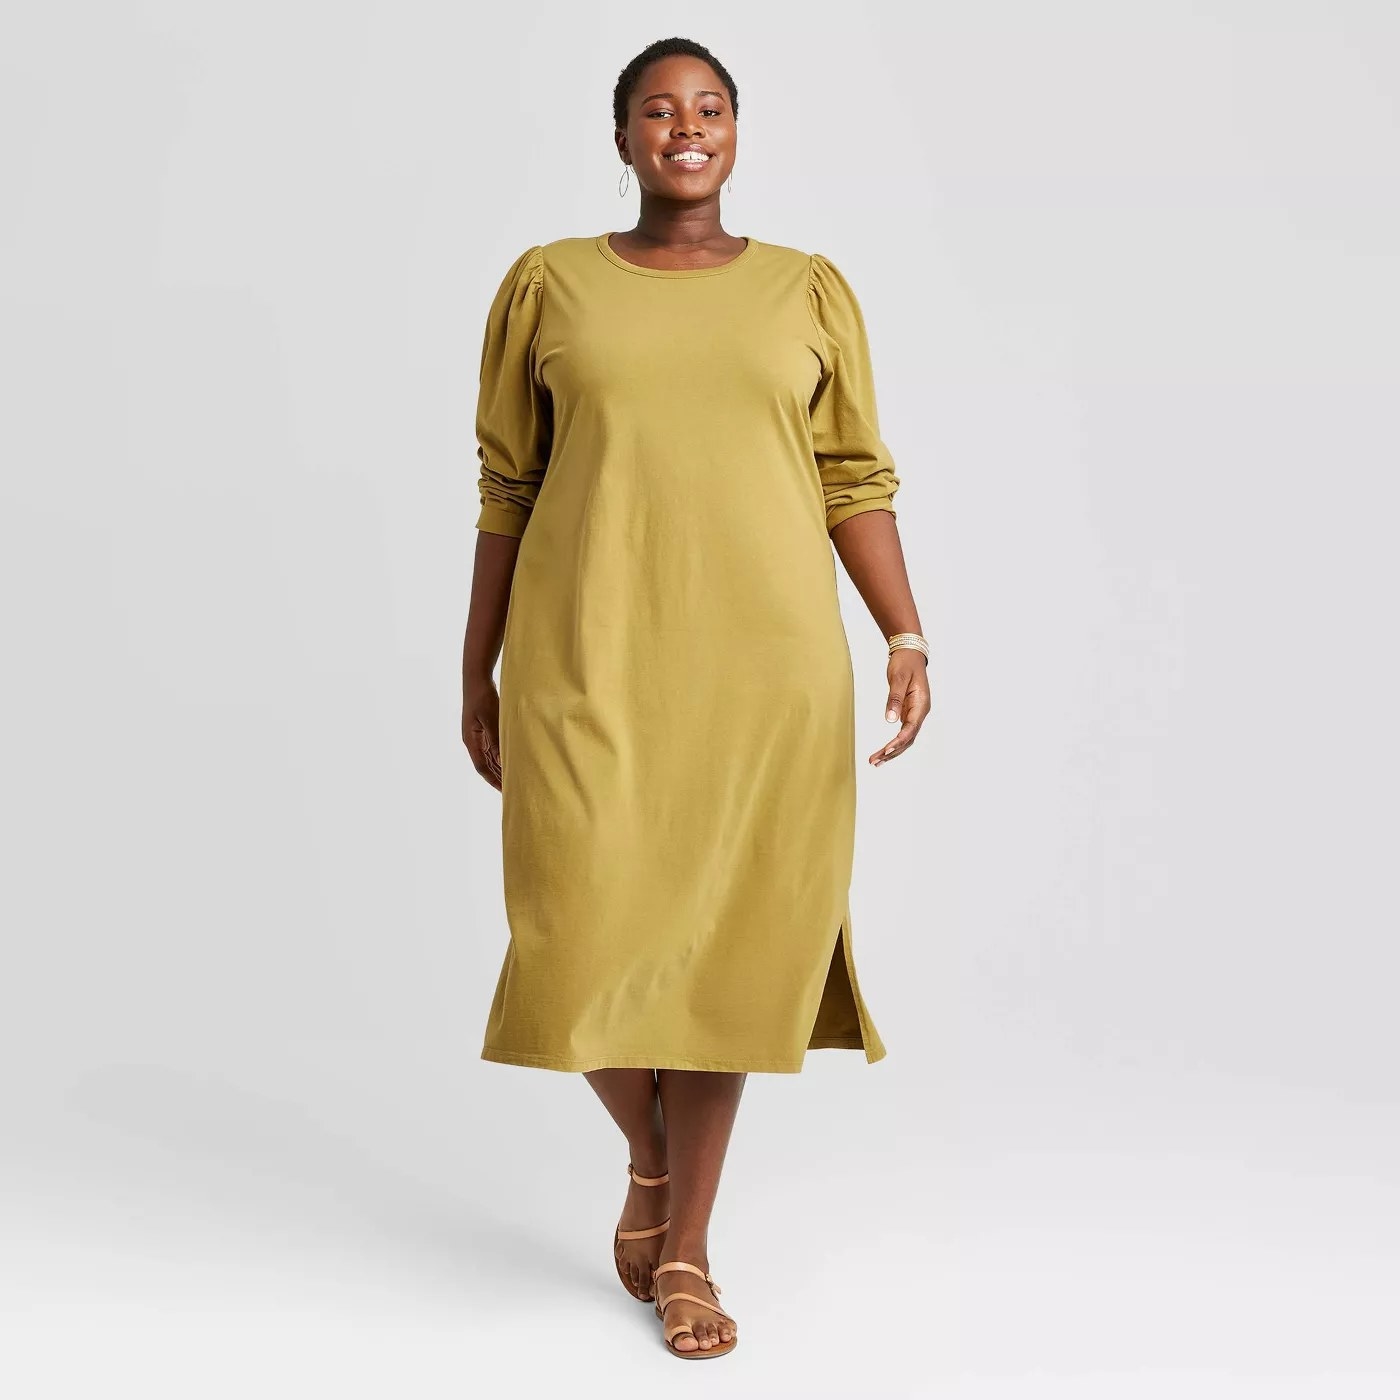 A mustard long sleeve shirt dress with puff sleeves paired with sandals.